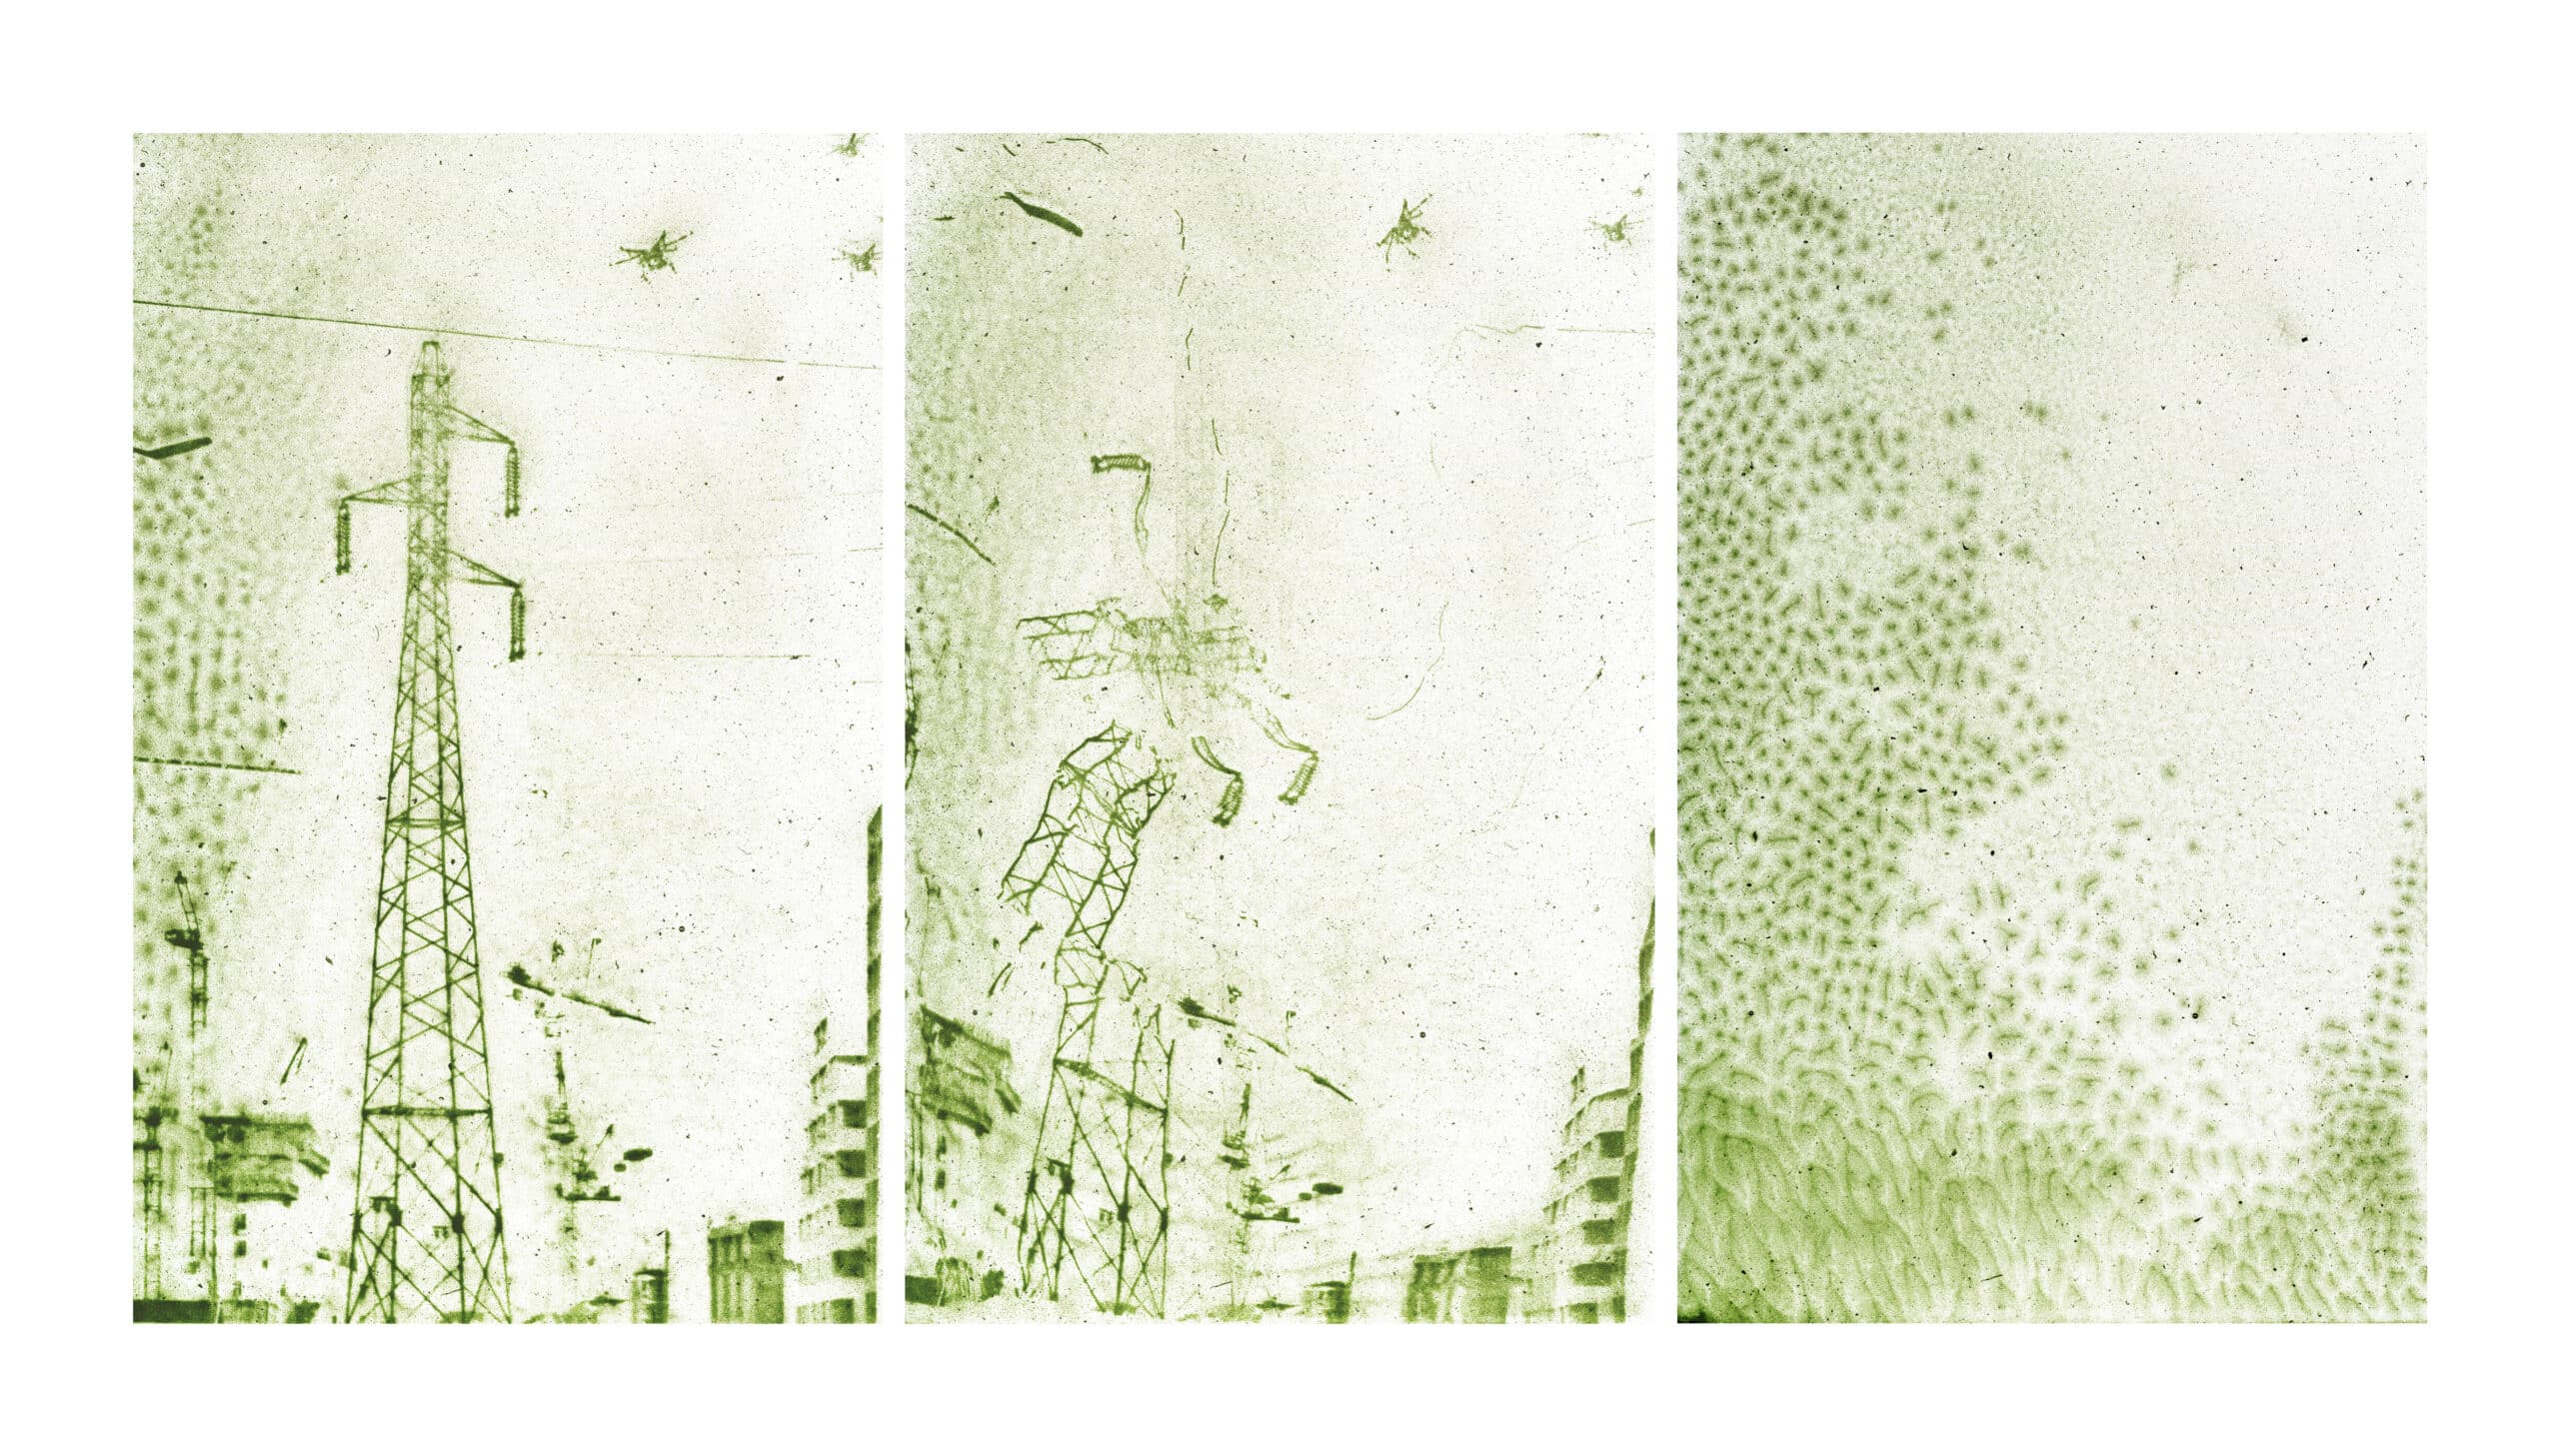 Note 3 – Fig. 8. <i>Entropie V (Entropy V)</i>, 2015, Hybrid UV ink printing on plexiglass, 35x60 cm. Photographic triptych created with the help of a scanner; the final image  corresponds to the interpretation of the figurative landscape by the microalgae © Lia Giraud